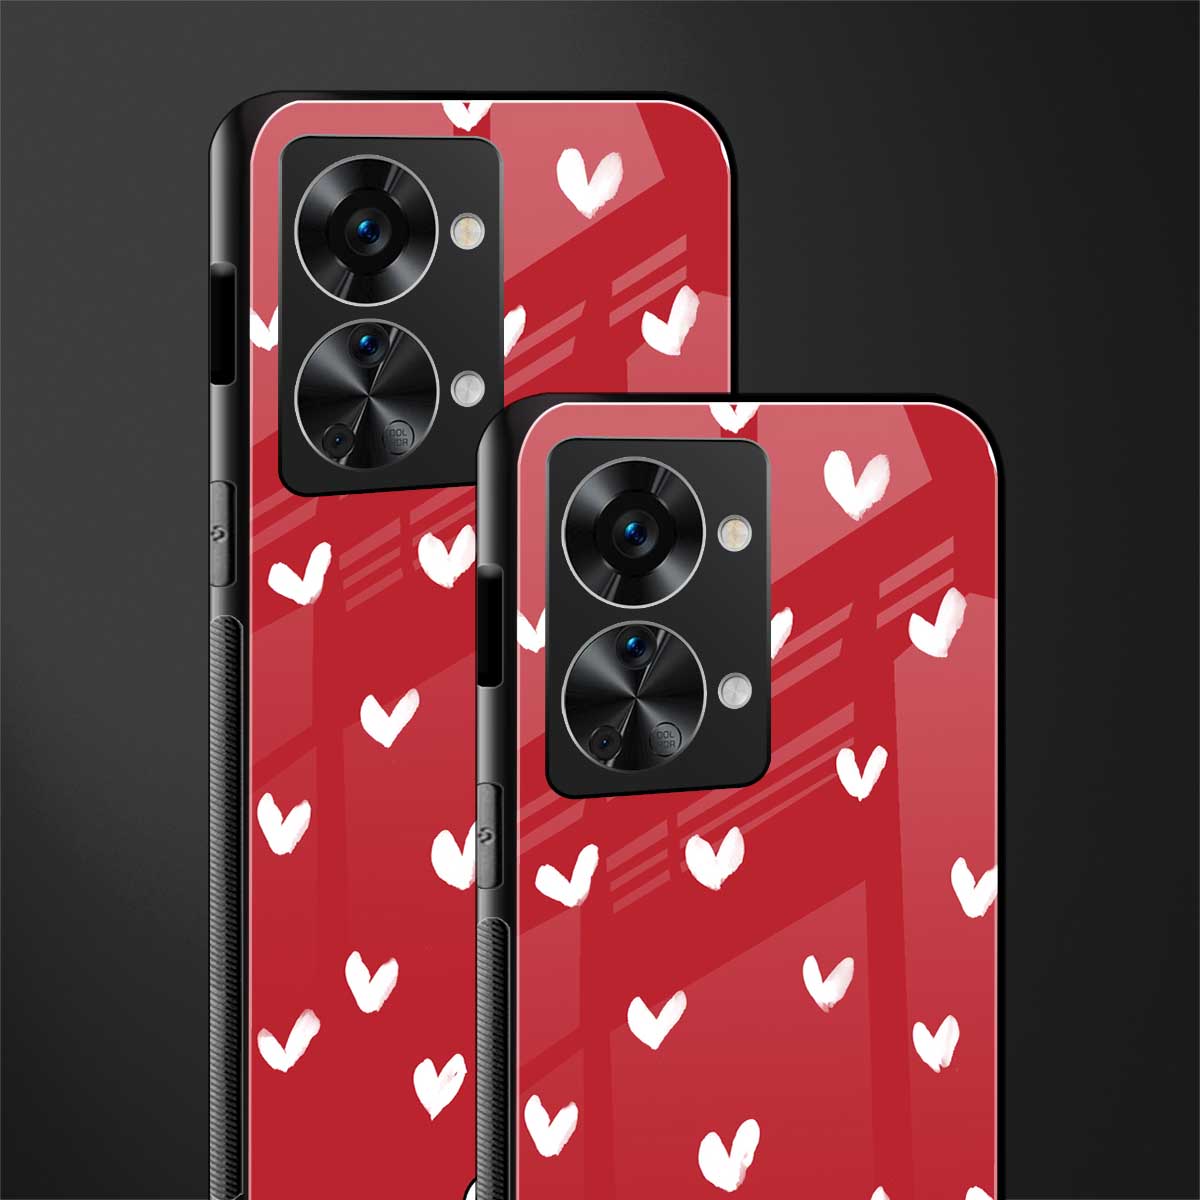 love is love red edition glass case for phone case | glass case for oneplus nord 2t 5g